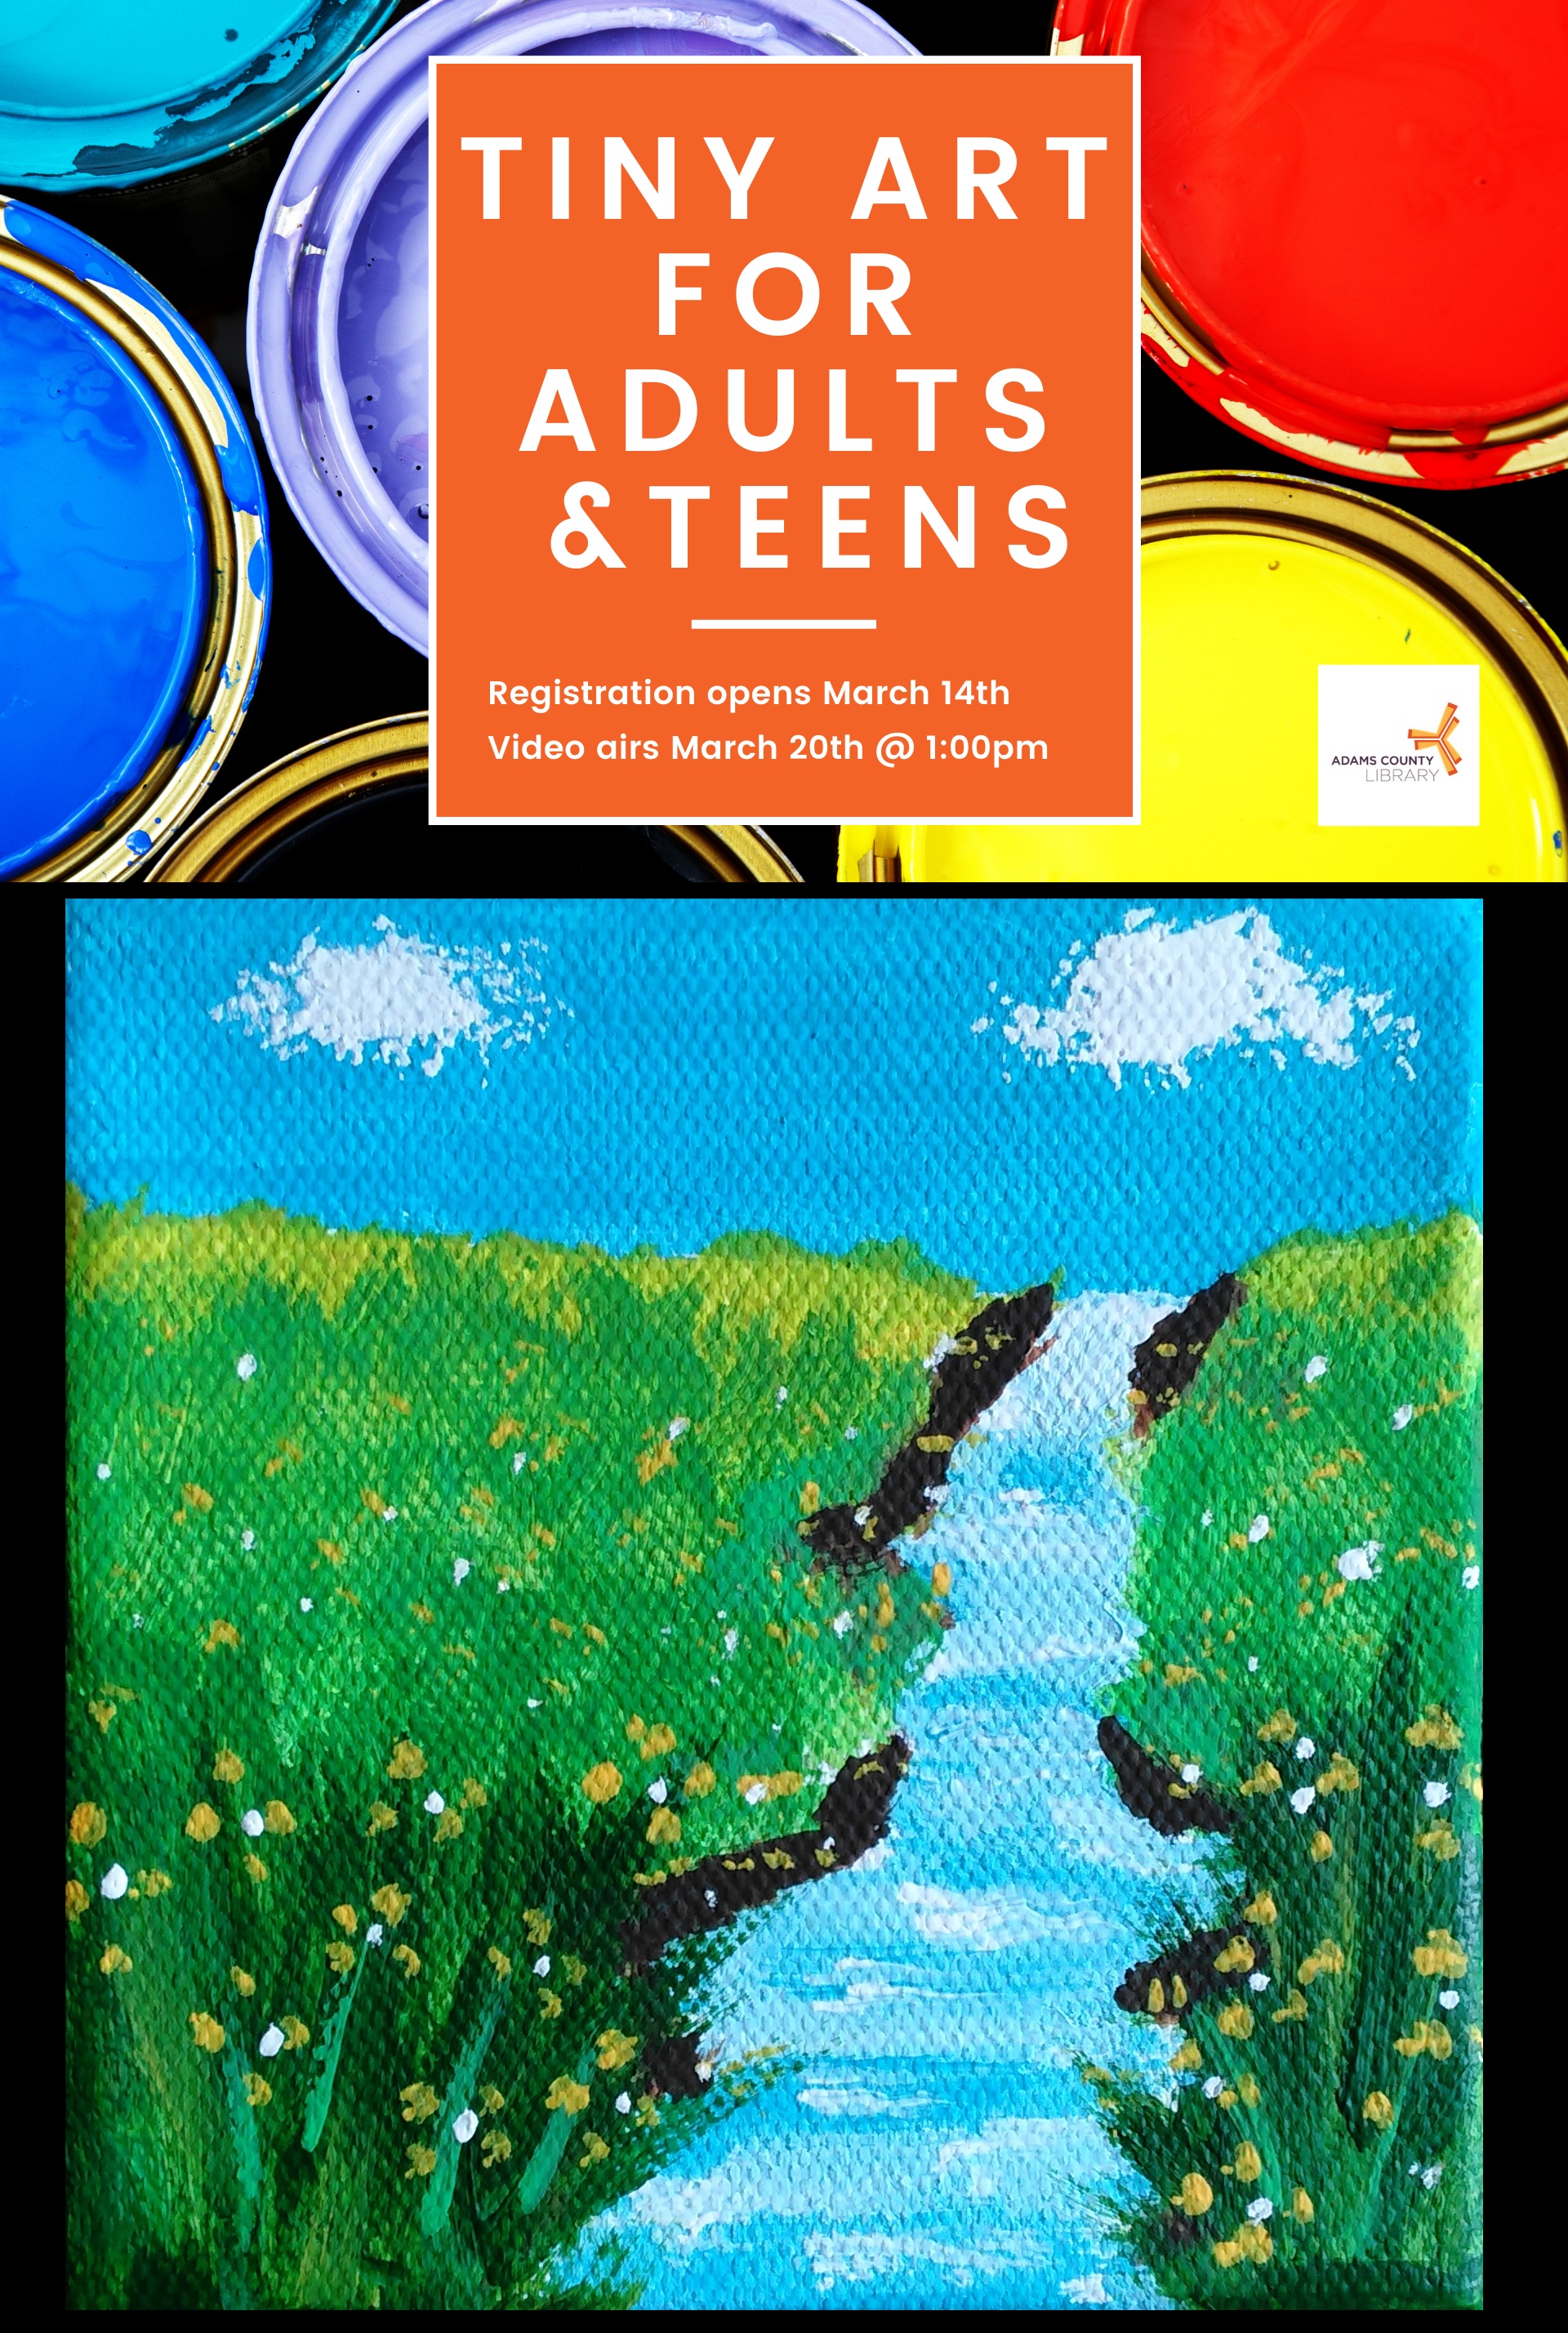 Tiny Art for Teens and Adults. Registration opens March 14th. Video airs March 20th at 1pm.